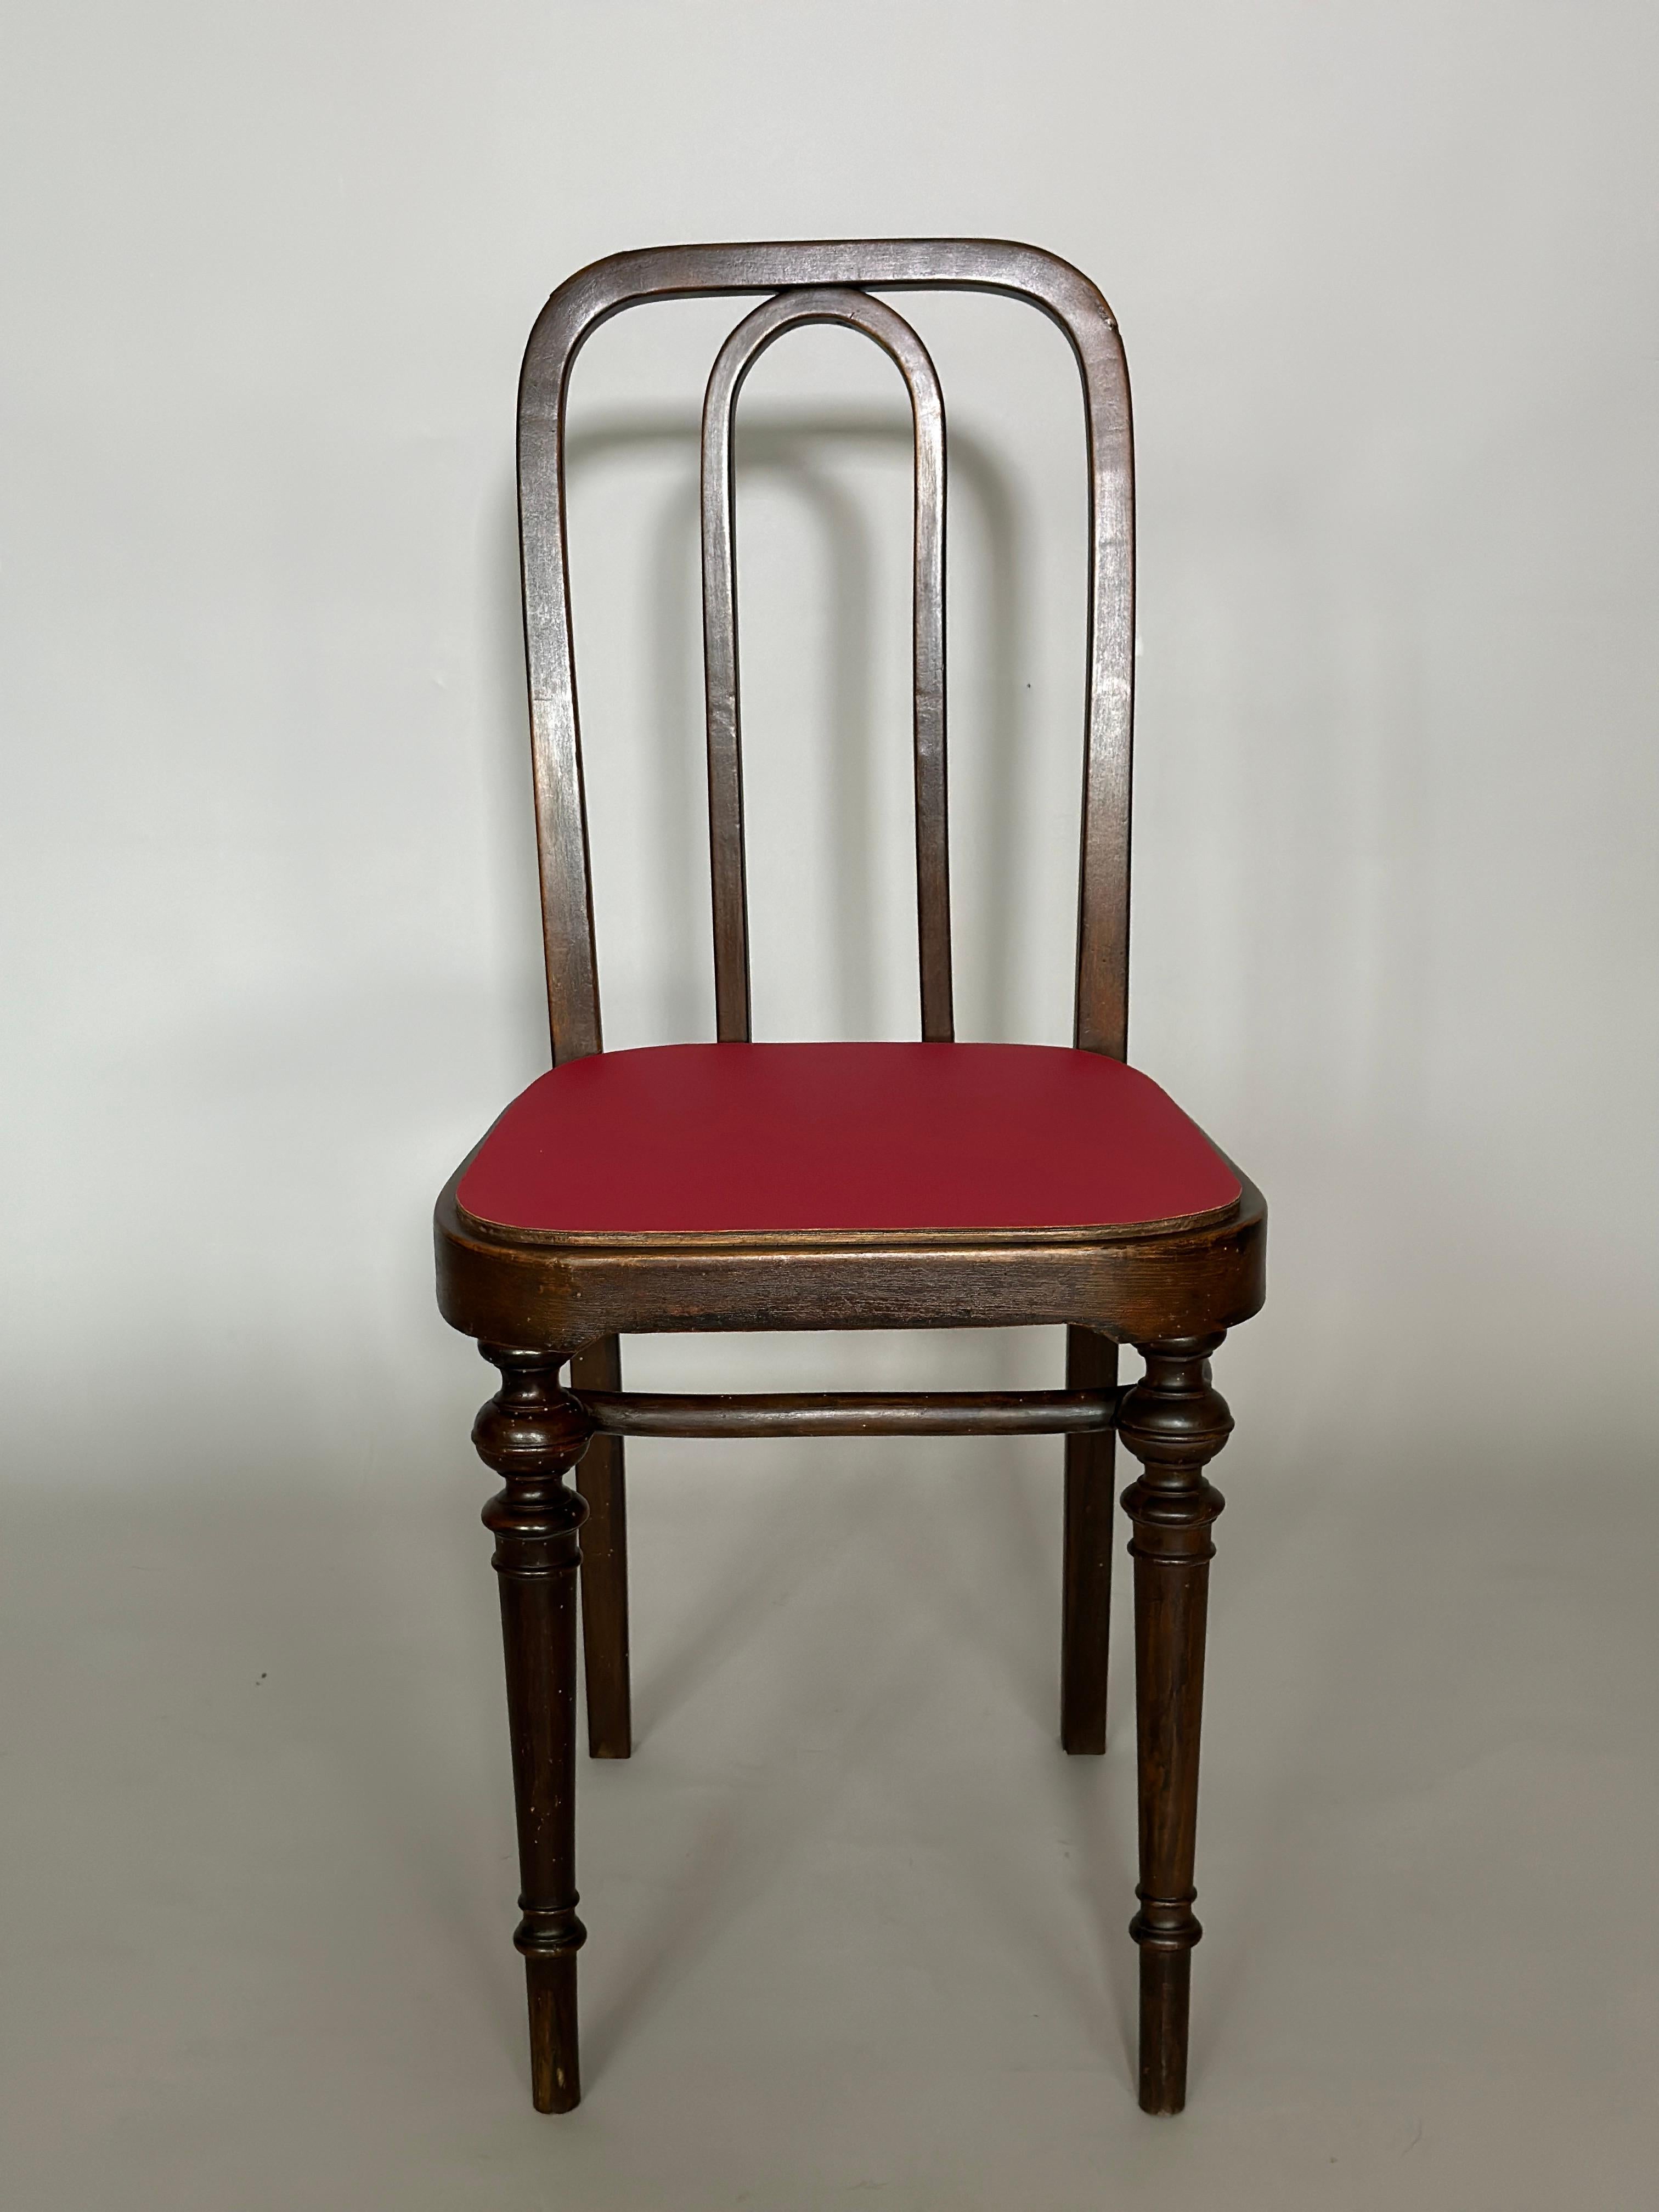 Thonet chair HO 41, restored in good condition. Designed by Michael Thonet.